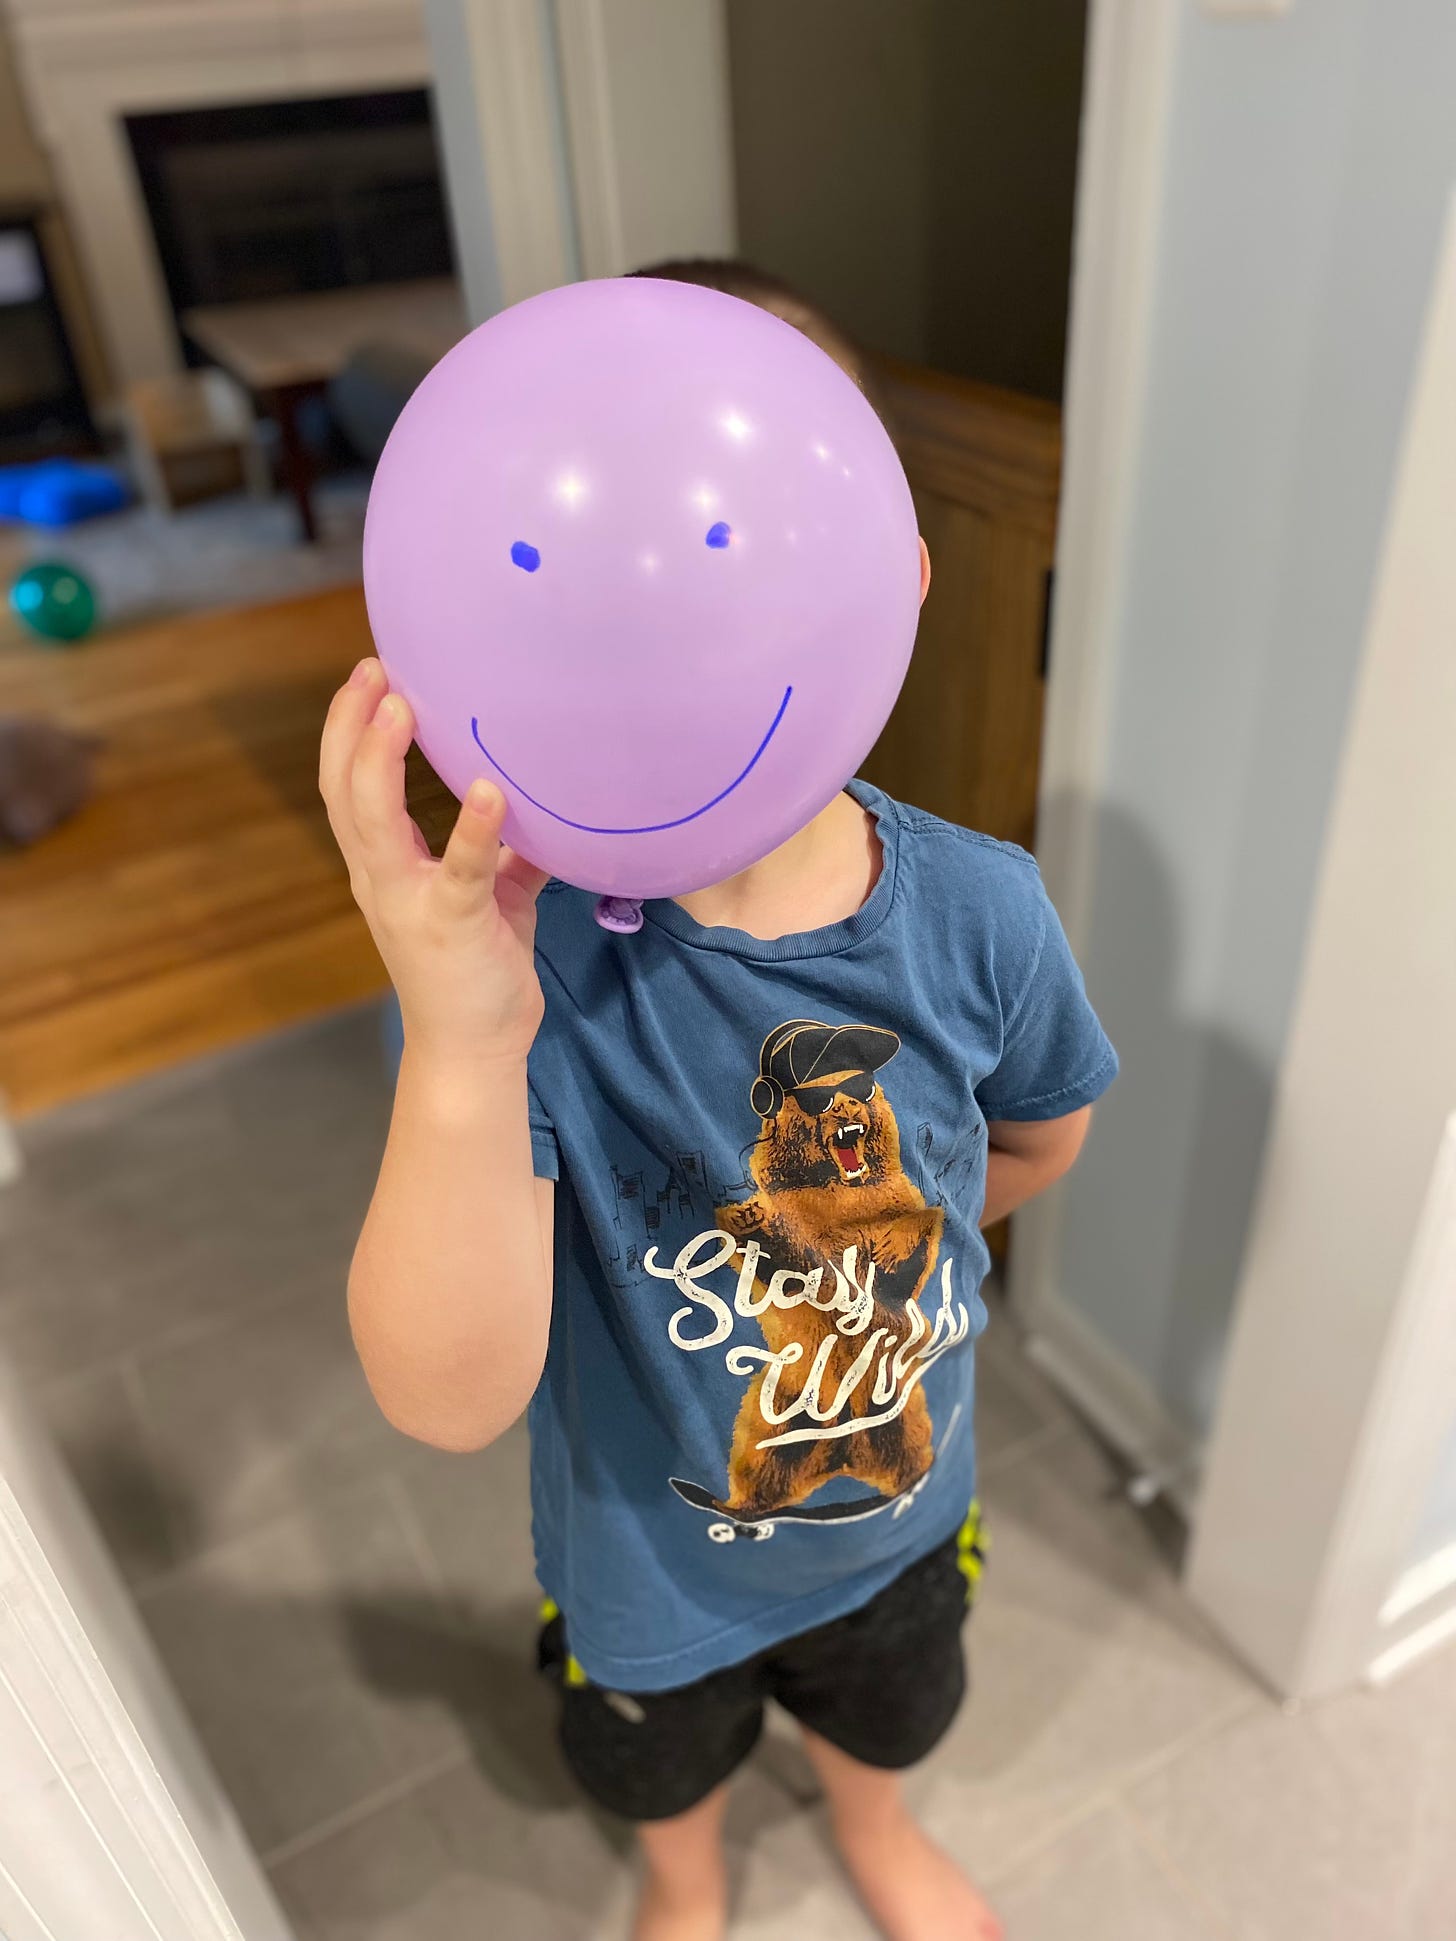 Child holding balloon with smiley face on it